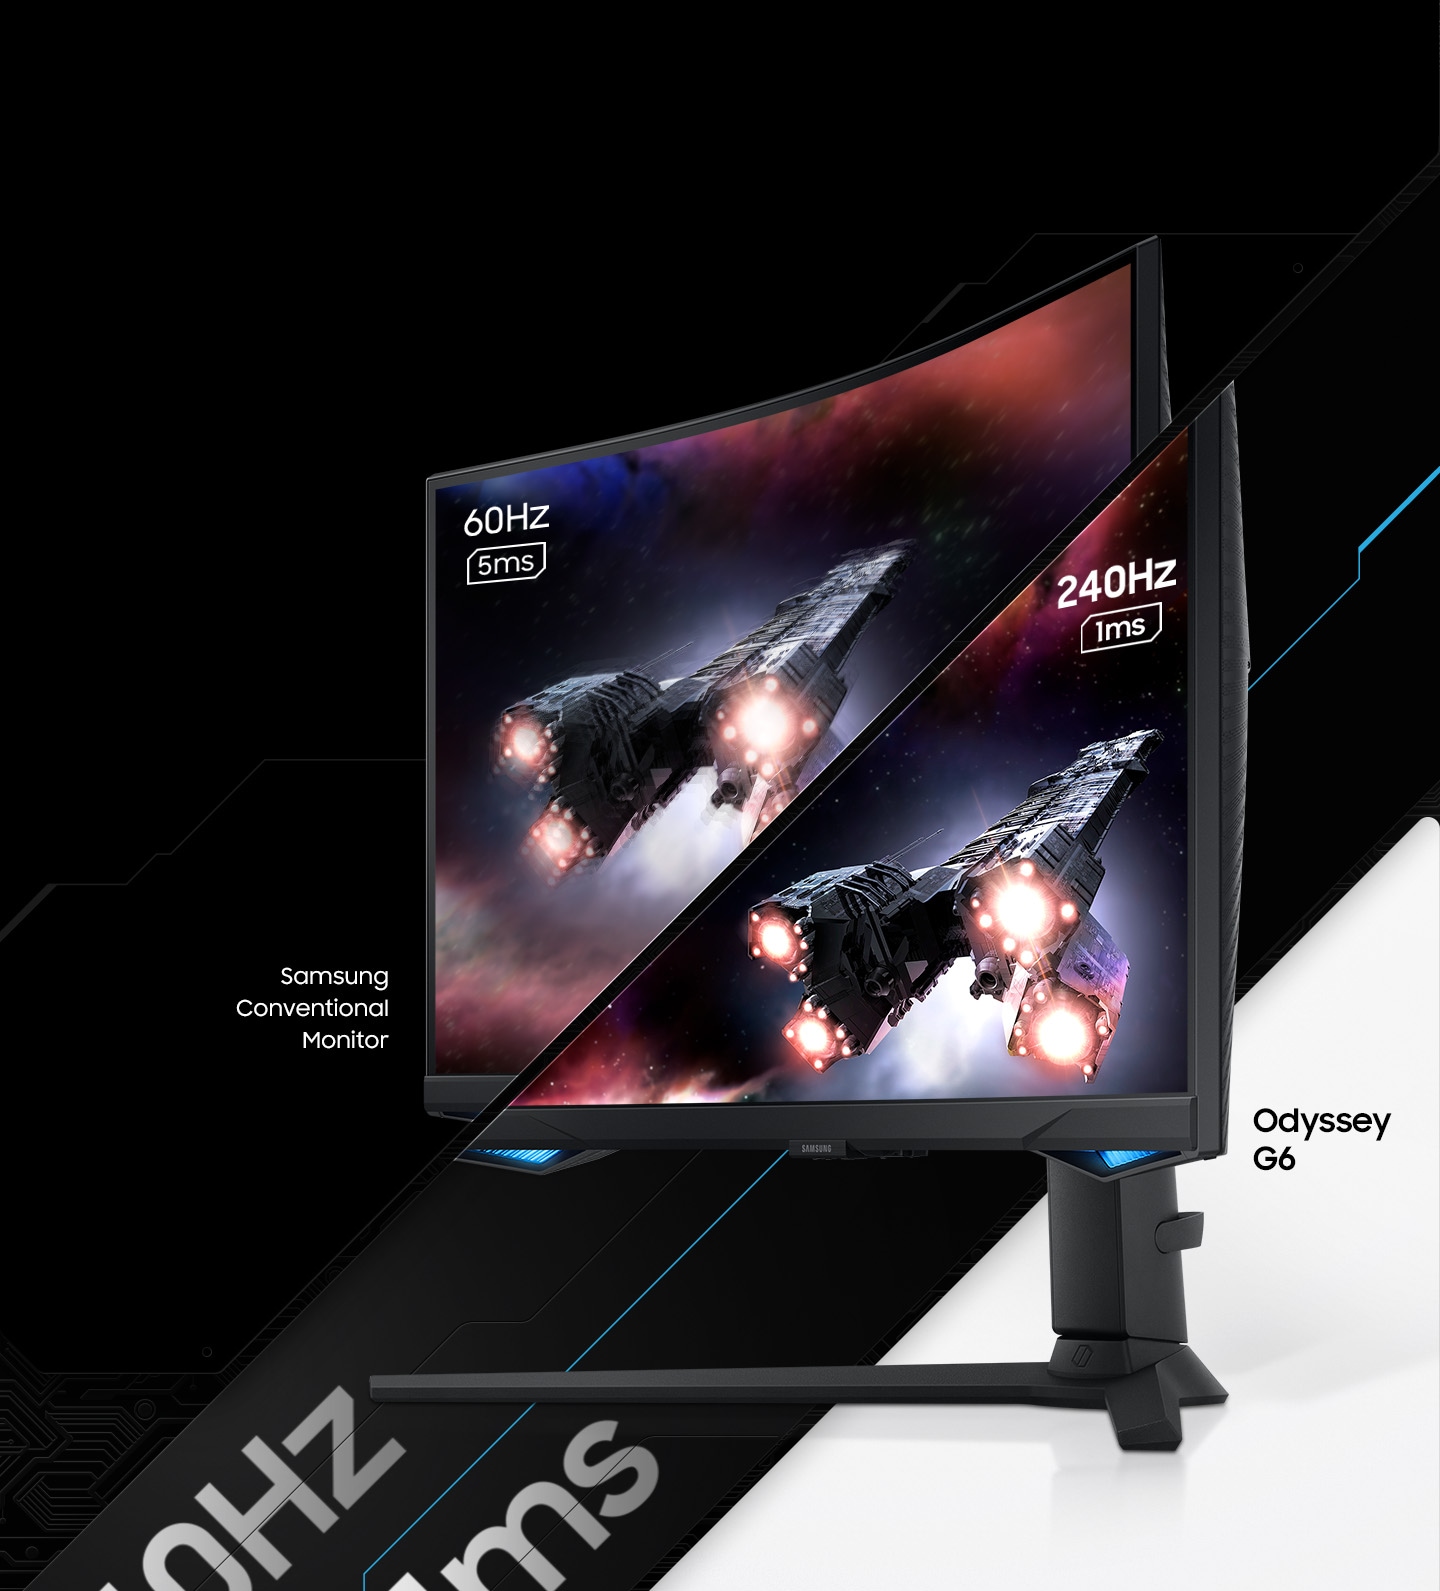 A monitor which is seen from its right side shows two spaceships blasting off into space. The monitor is split in two to show the difference in display quality comparing two different refresh rates and response time, one for conventional monitor with 60Hz and 5ms and the other for Odyssey G6 with 240Hz and 1ms.